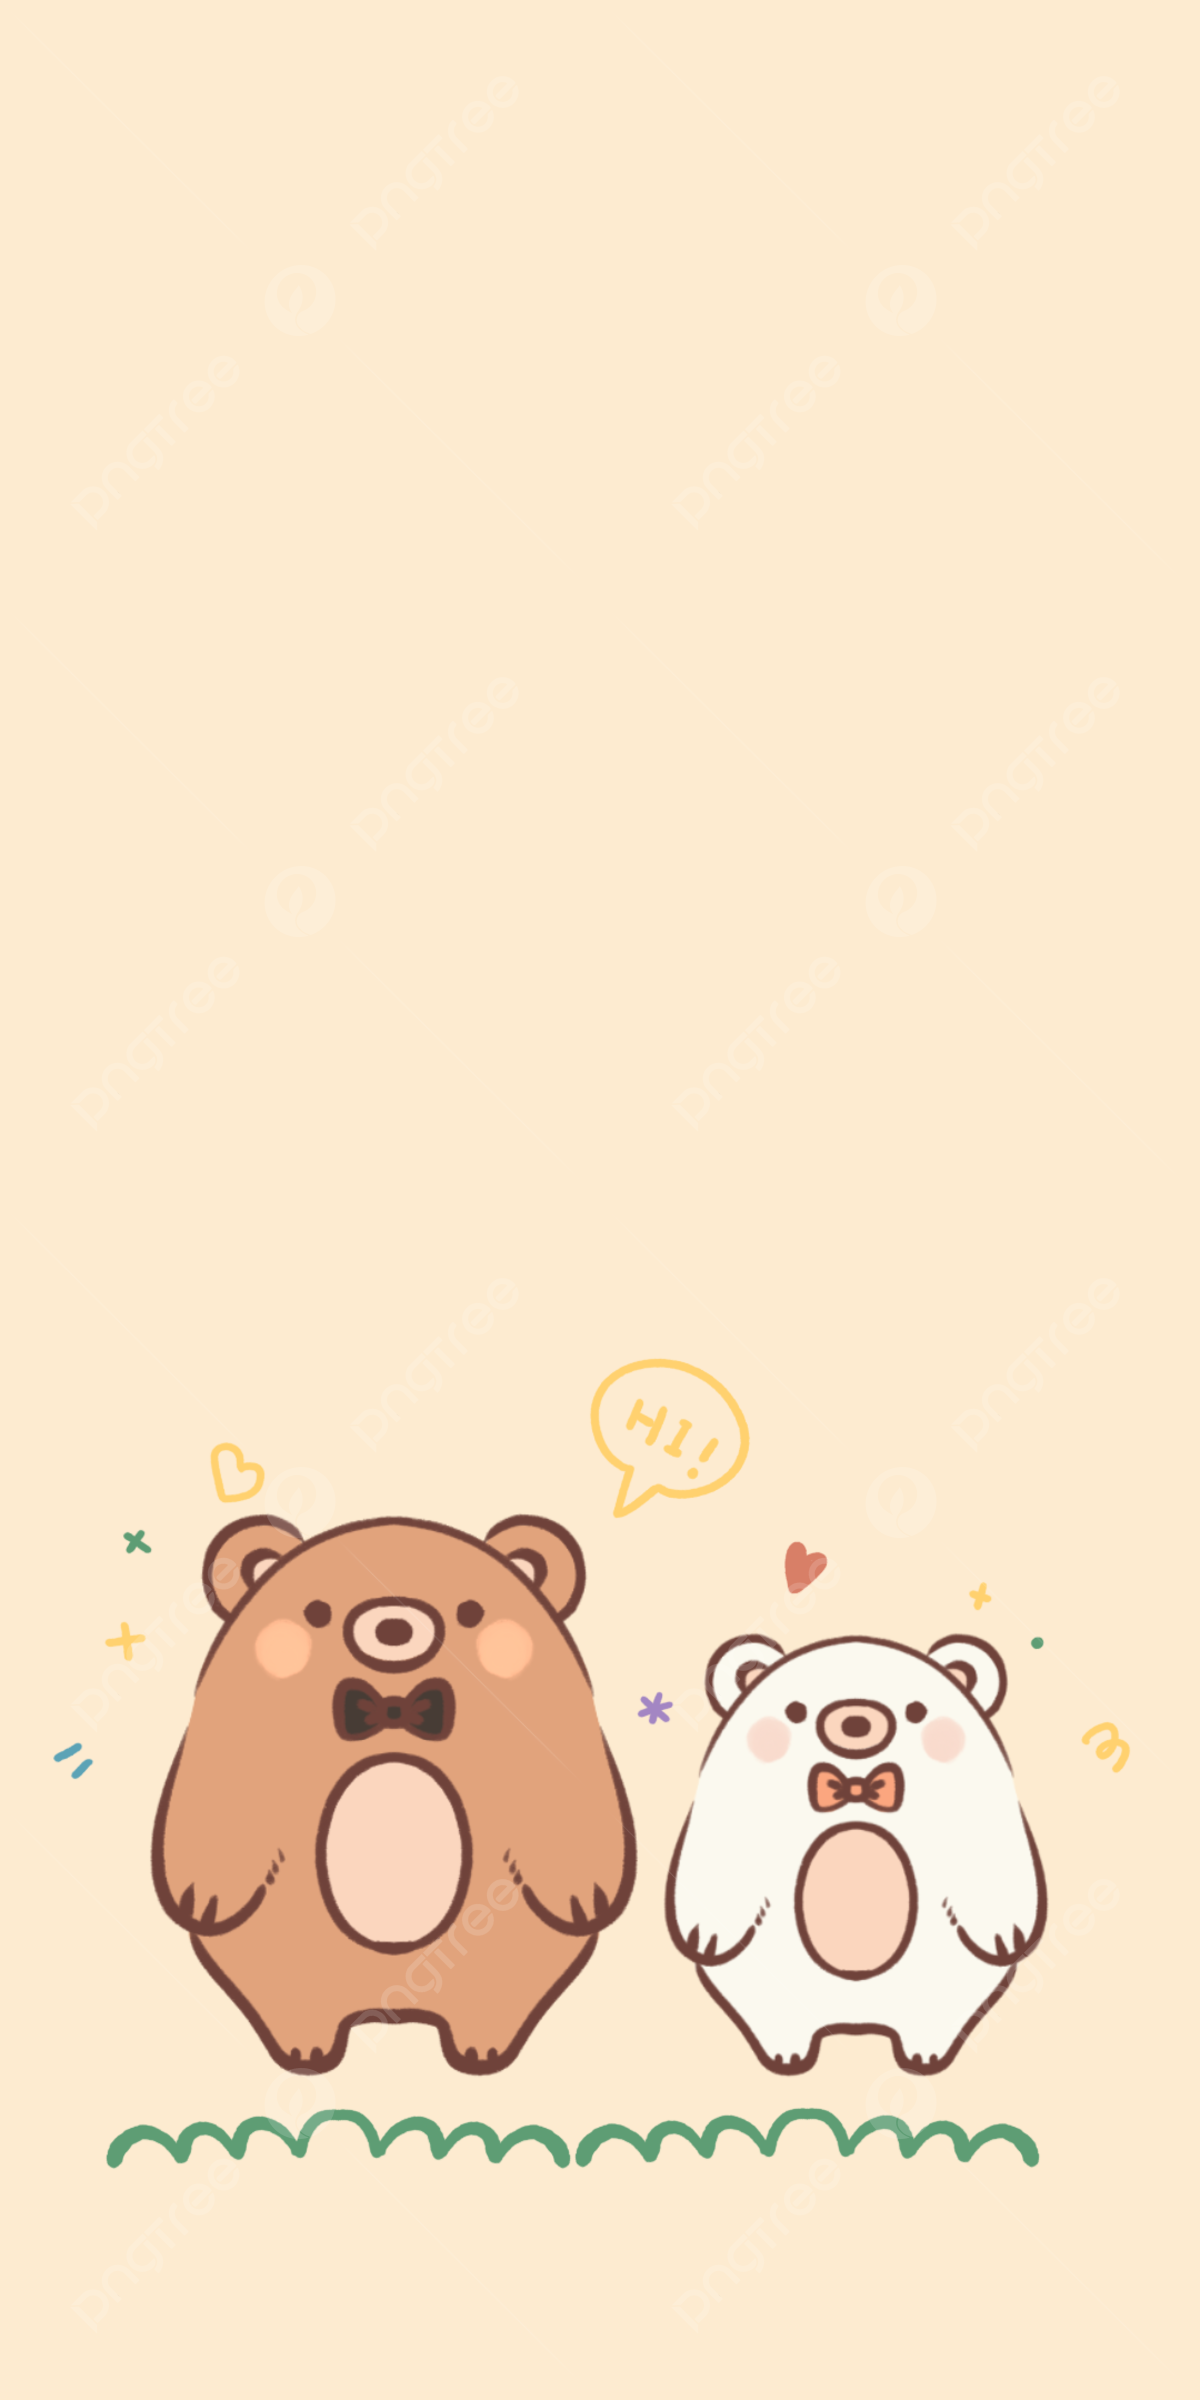 Two little bears lovely style wallpaper background little bear wallpaper cartoon background image for free download